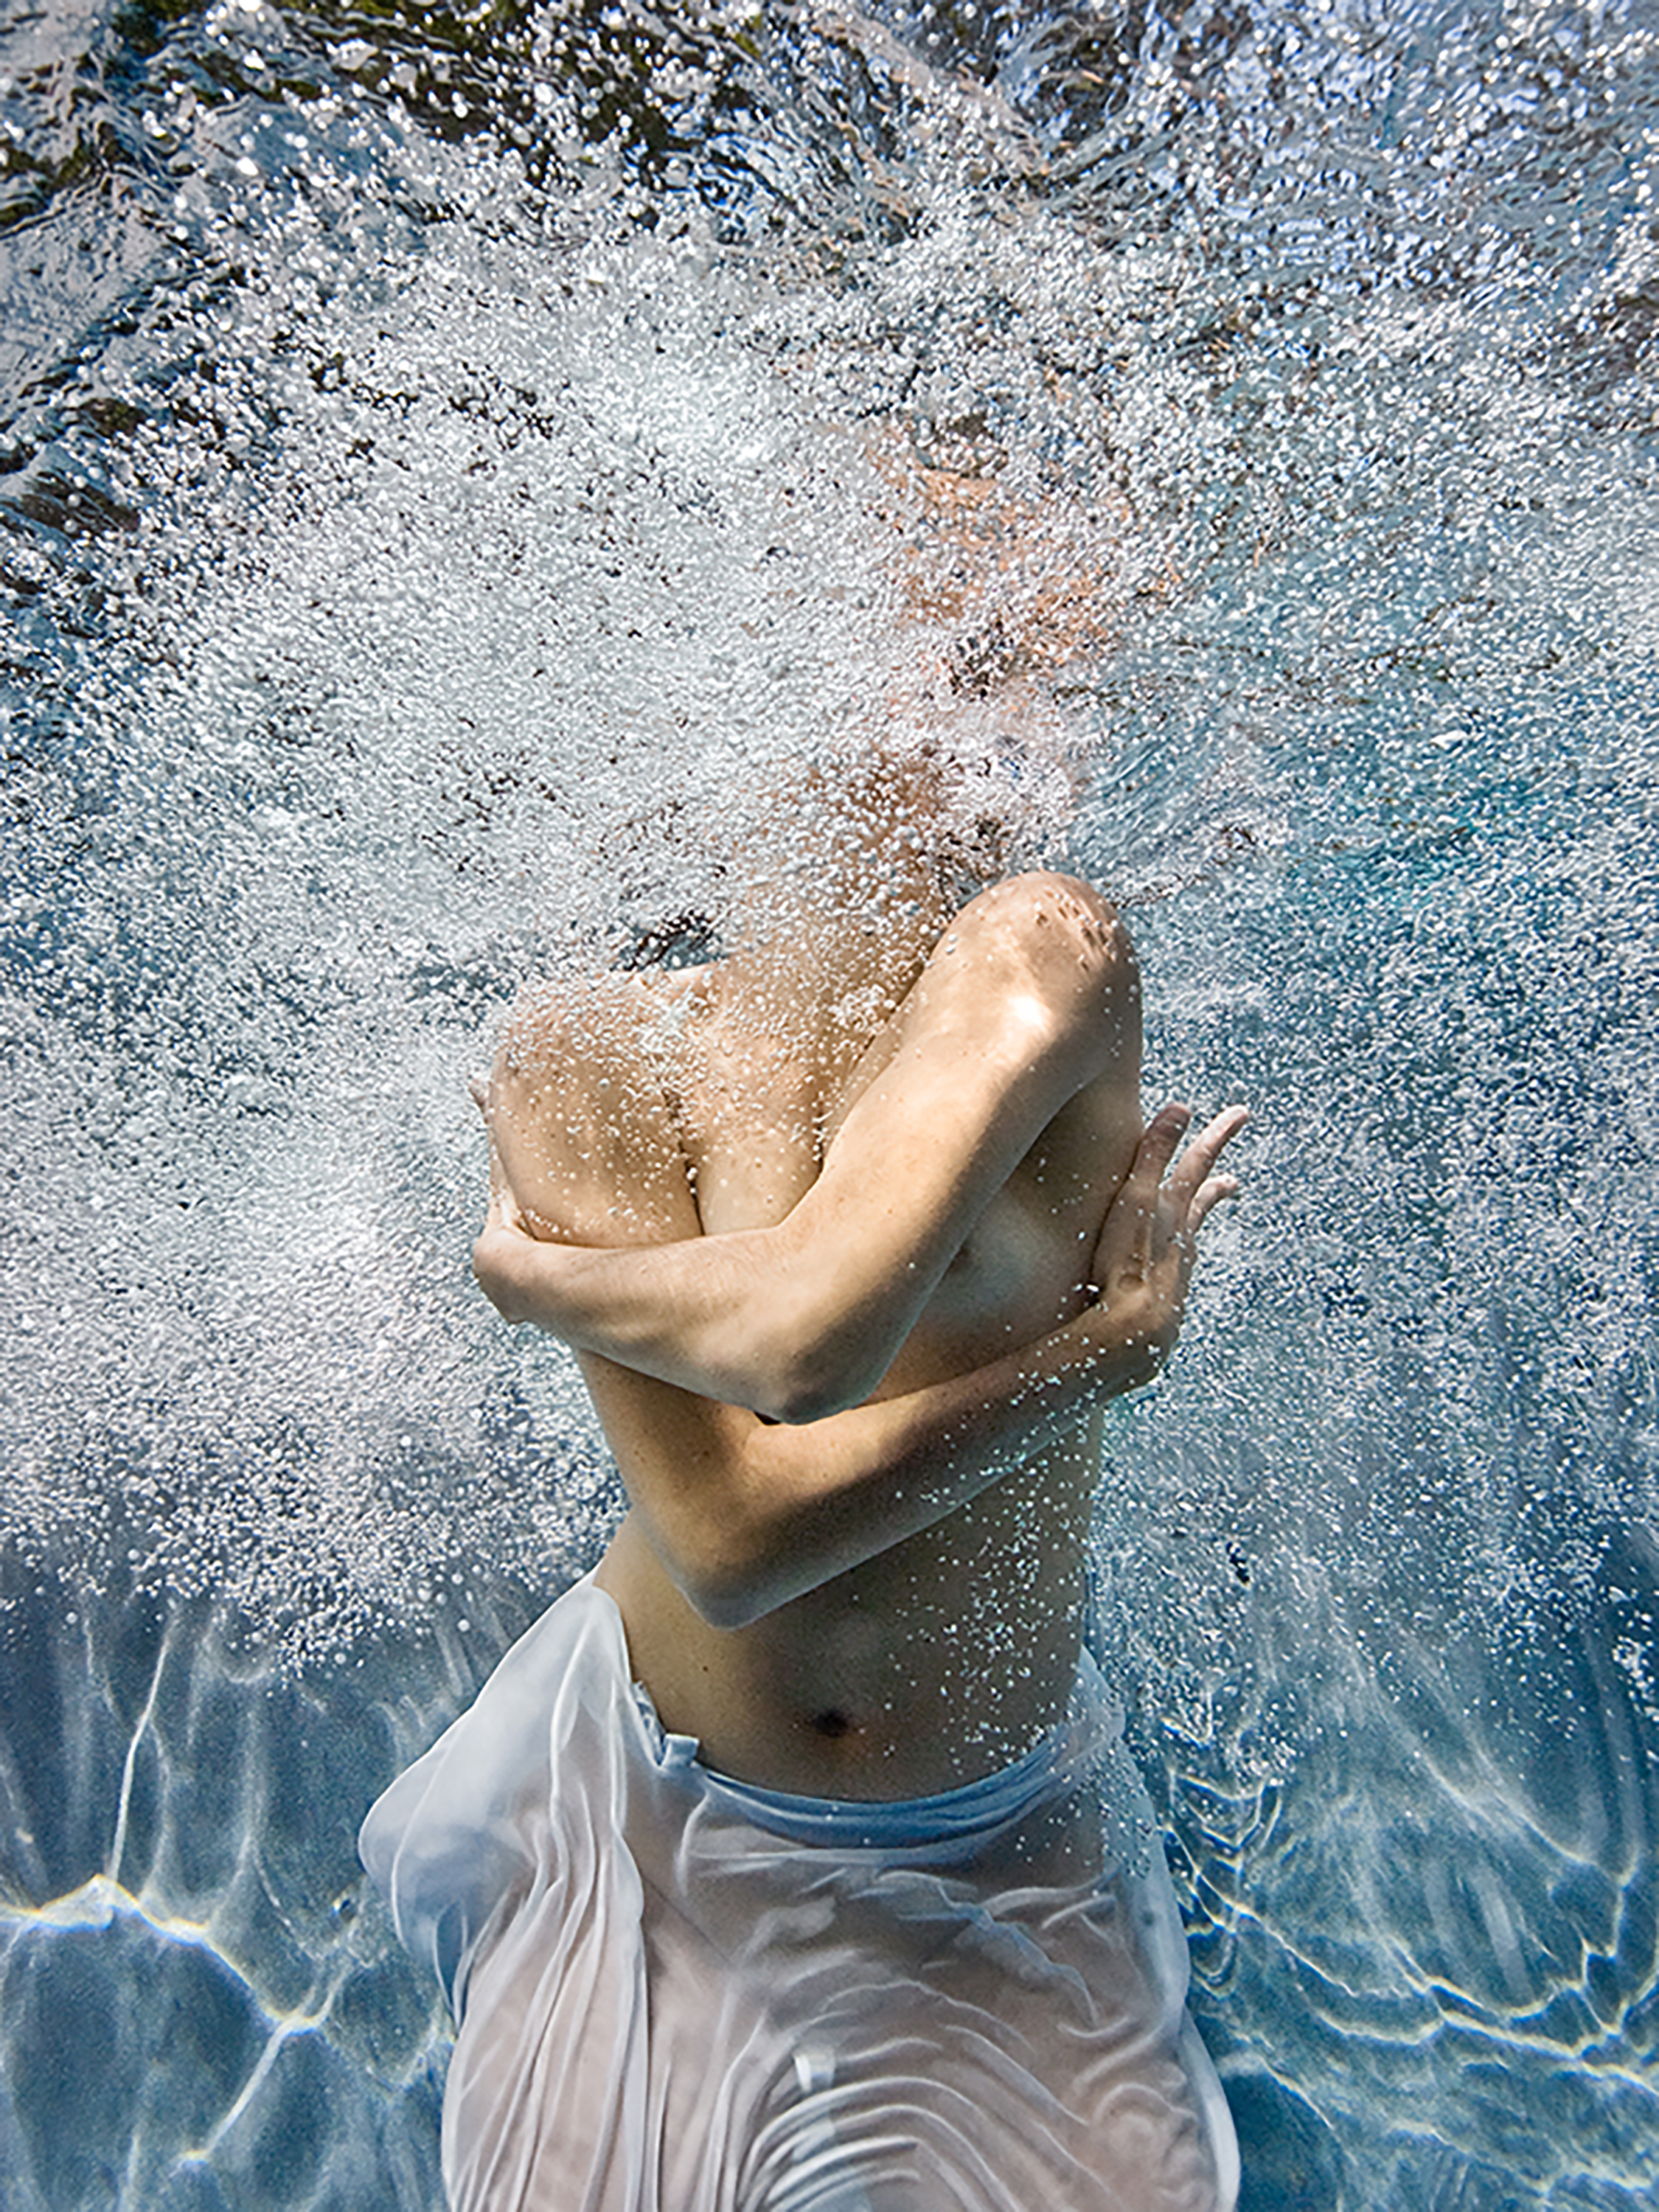 Barbara Cole Gives Fascinating Insight Into Her Underwater Photography